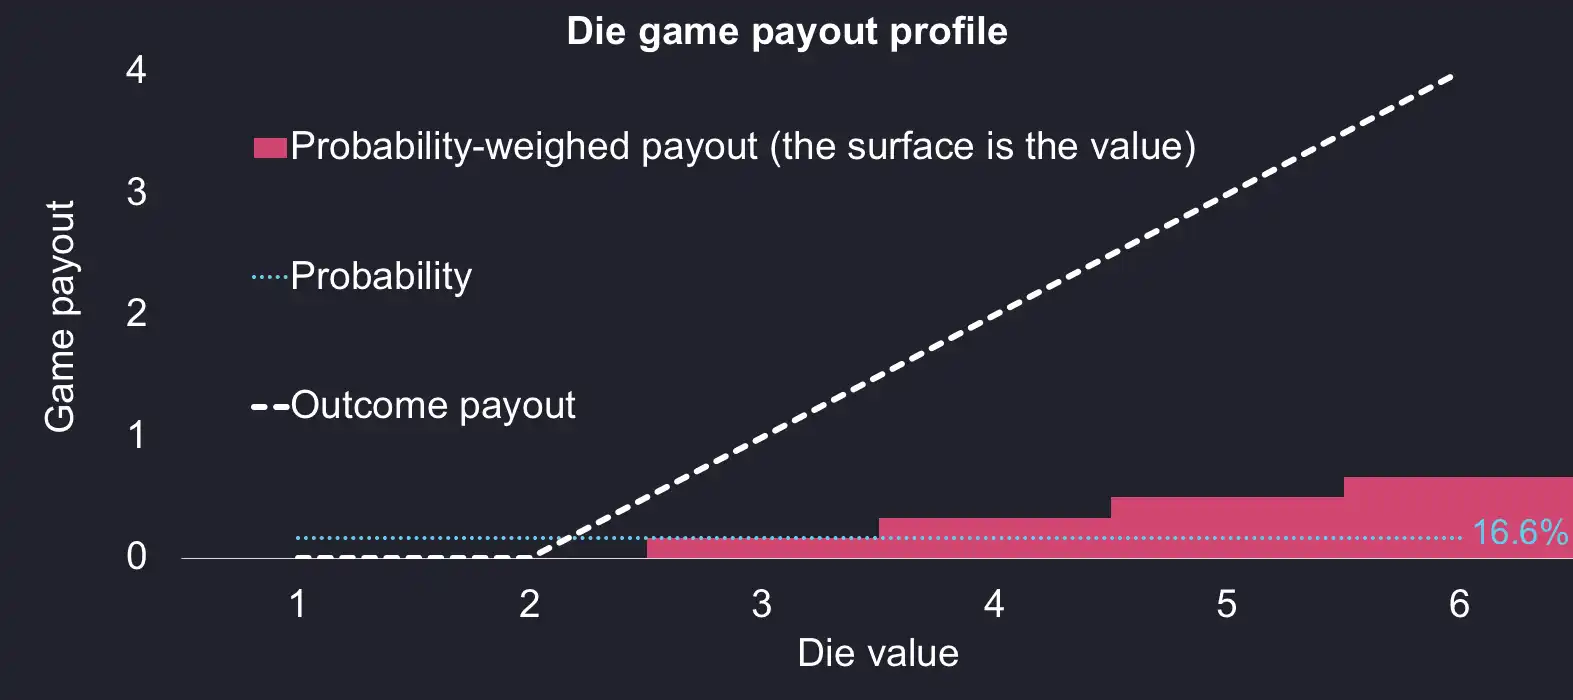 A chart showing the outcome profile of the dice game and the corresponding probabilities and probability-weighed expected payout values